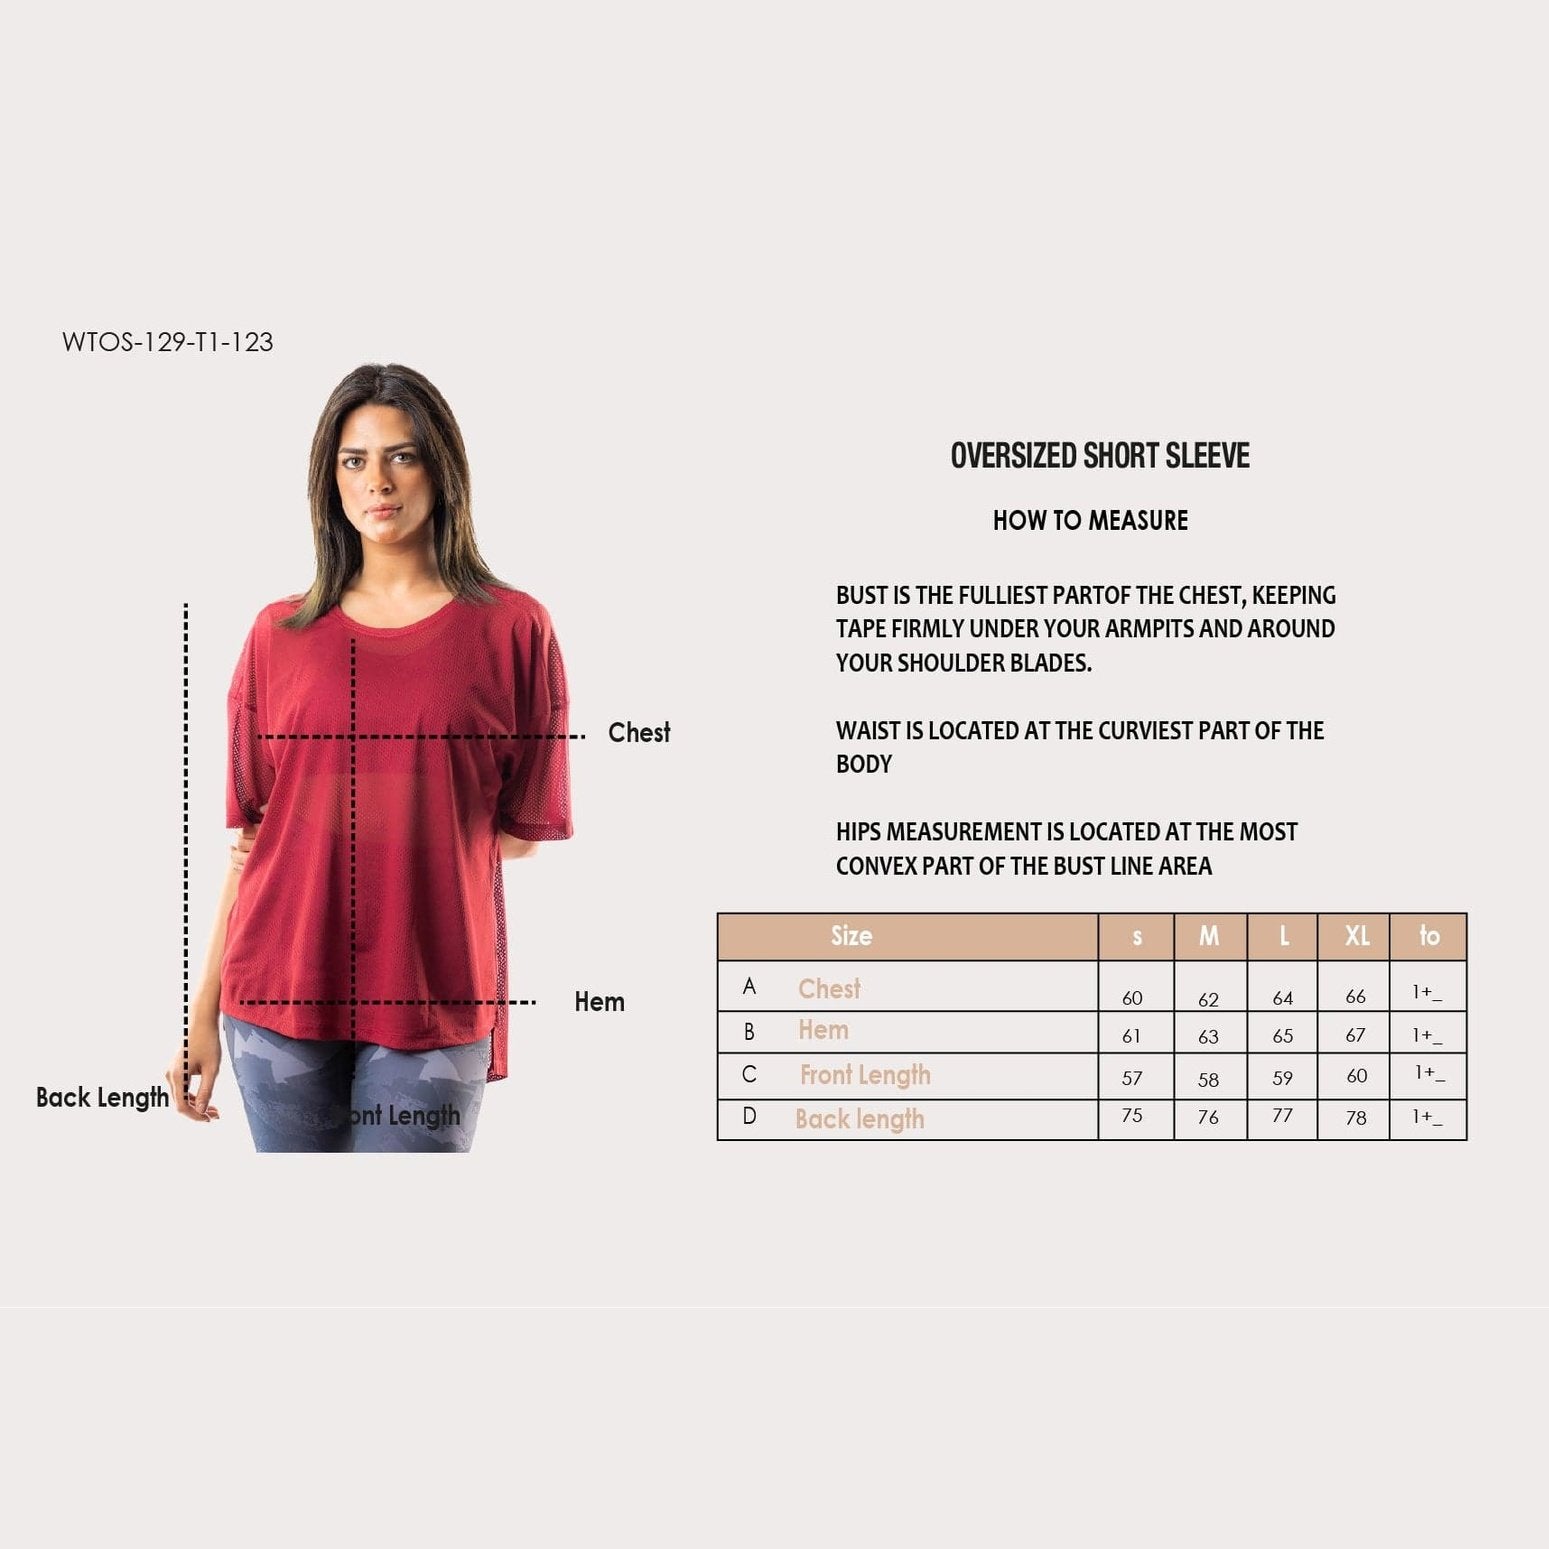 Breathable Mesh T-Shirt in Burgundy - Sporty Pro